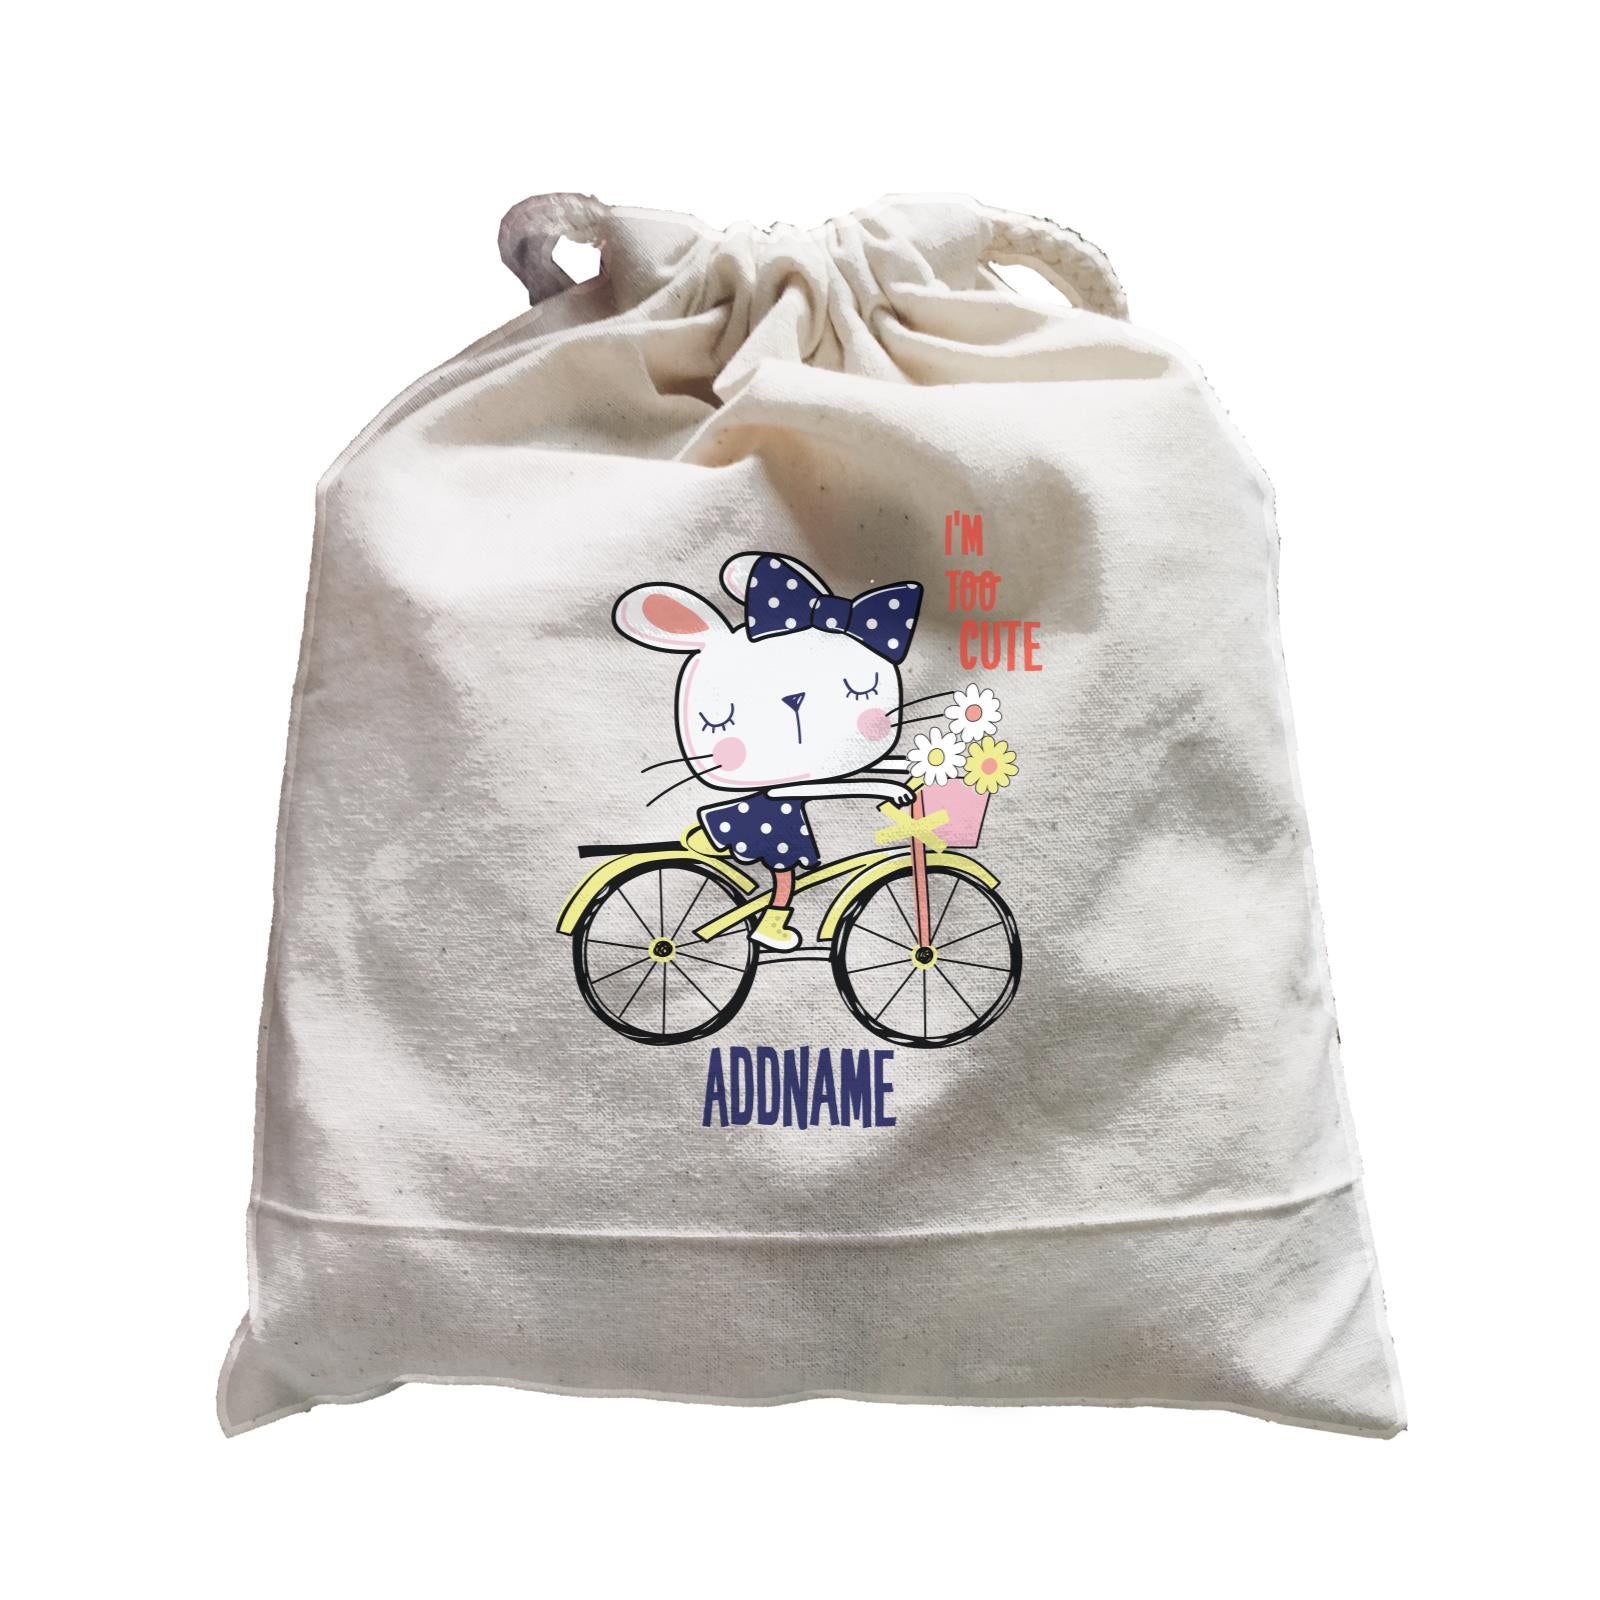 Cool Vibrant Series I'm Too Cute Bunny on Bicycle Addname Satchel